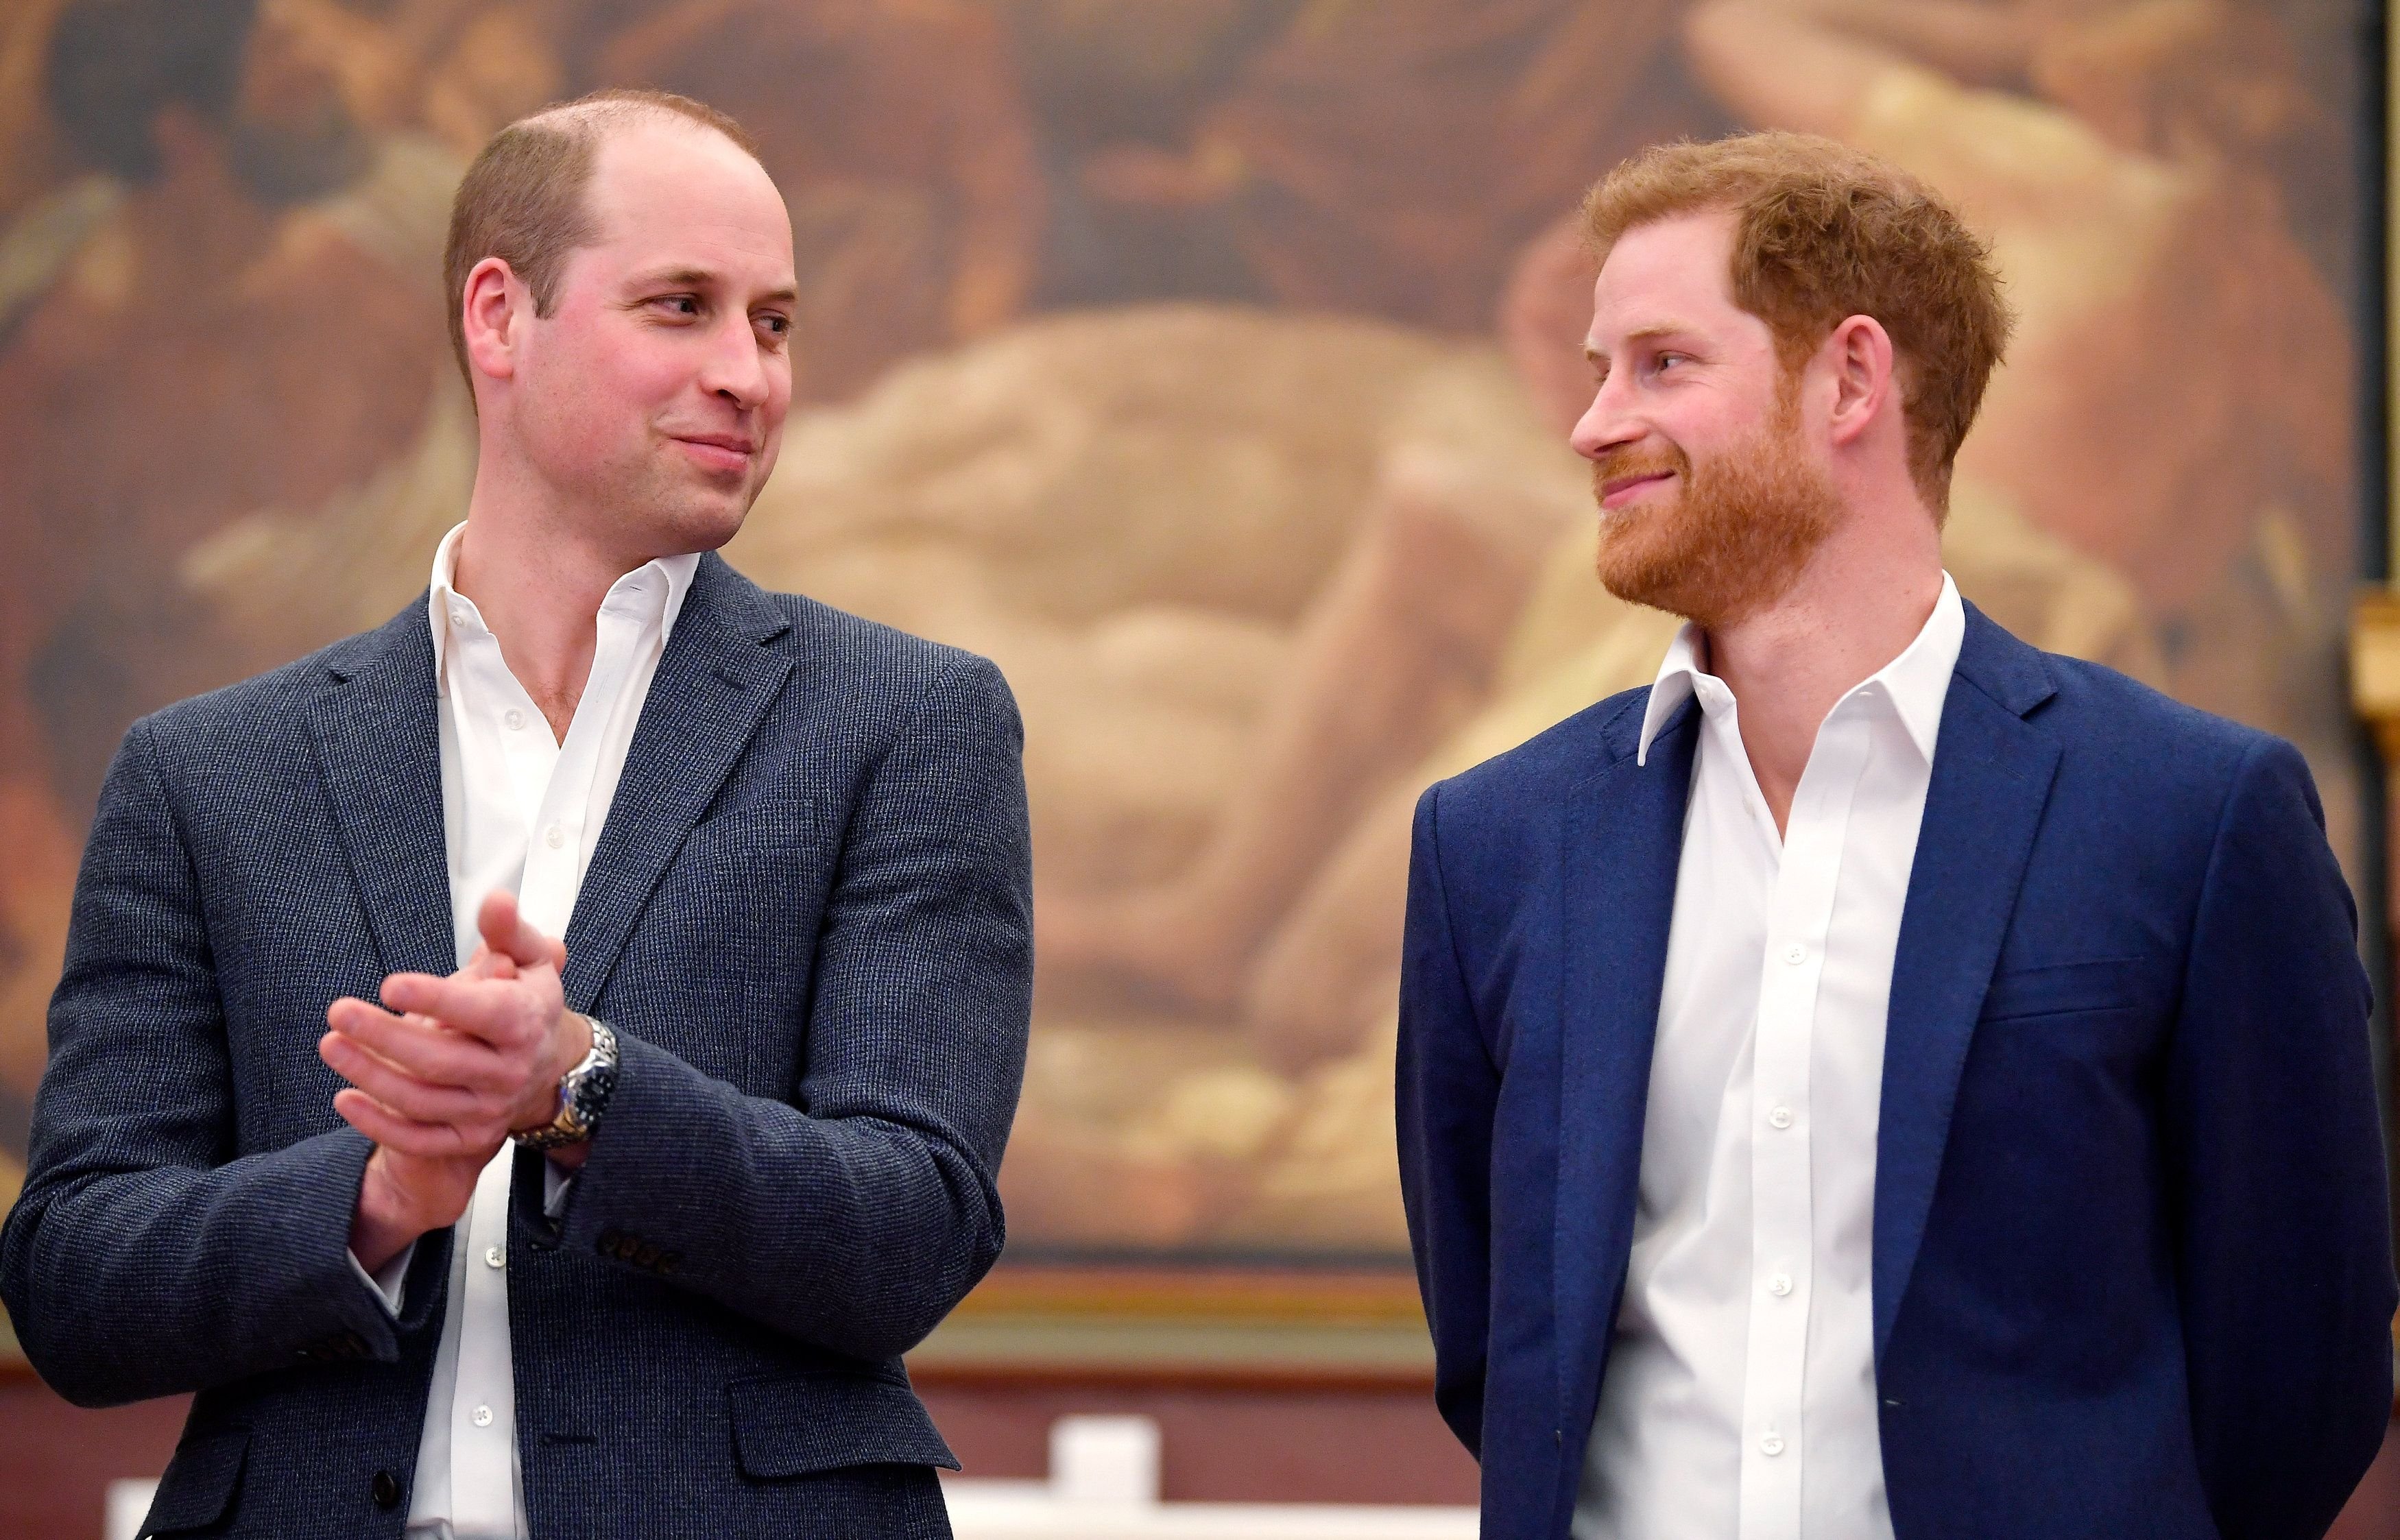 Prince William and Prince Harry at the opening of the Greenhouse Sports Centre on April 26, 2018 | Photo: Getty Images